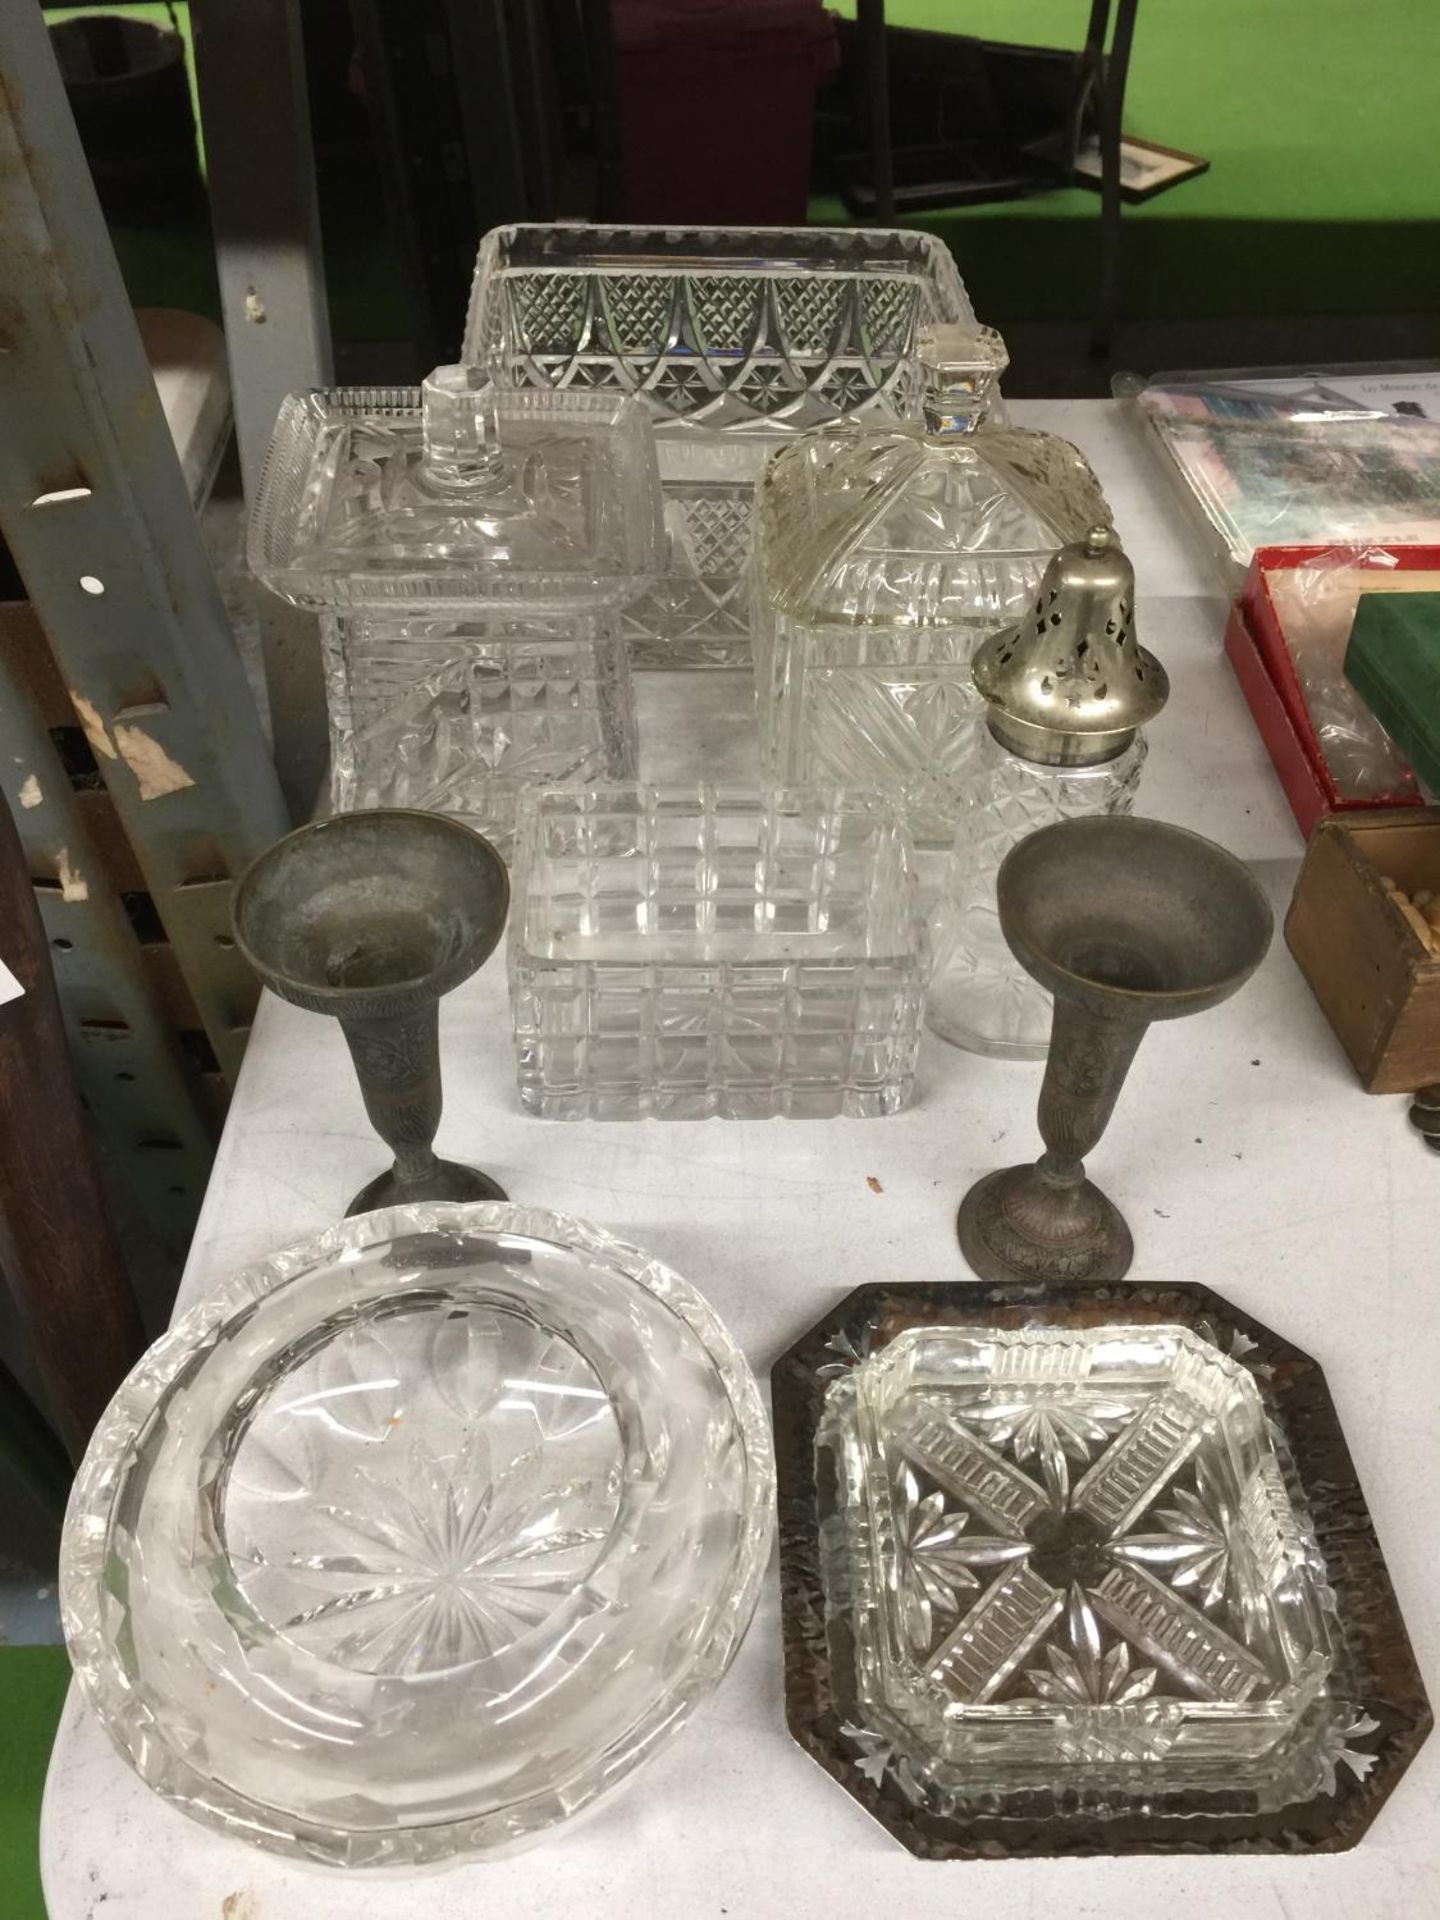 A QUANTITY OF GLASSWARE INCLUDING LIDDED BOWLS, DISHES, CANDLESTICKS, SUGAR SIFTER, ETC